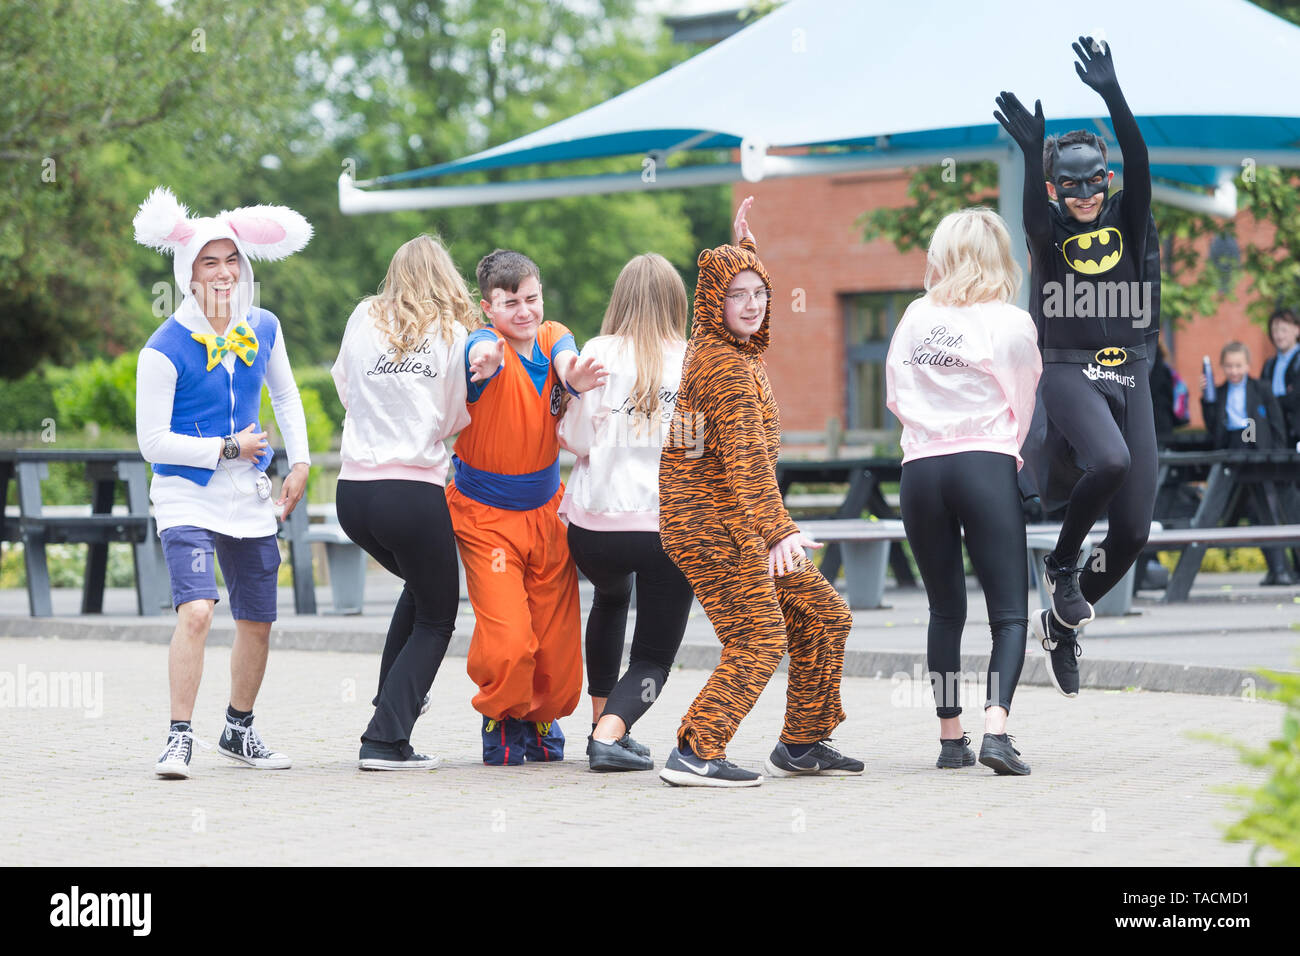 Bewdley, Worcestershire, UK. 24th May, 2019. All over England and Wales as well as other parts of the UK, hundreds of thousands of school sixth form students are leaving their respective school before taking their A Level exams. It has become increasingly traditional for them to dress up in fancy clothes on their final day. This year there are 745,585 exam entries at A Level, a 2% decrease from 2018.  A Level results day is Thursday 15th August. [Data source: gov.uk]. Credit: Peter Lopeman/Alamy Live News Stock Photo